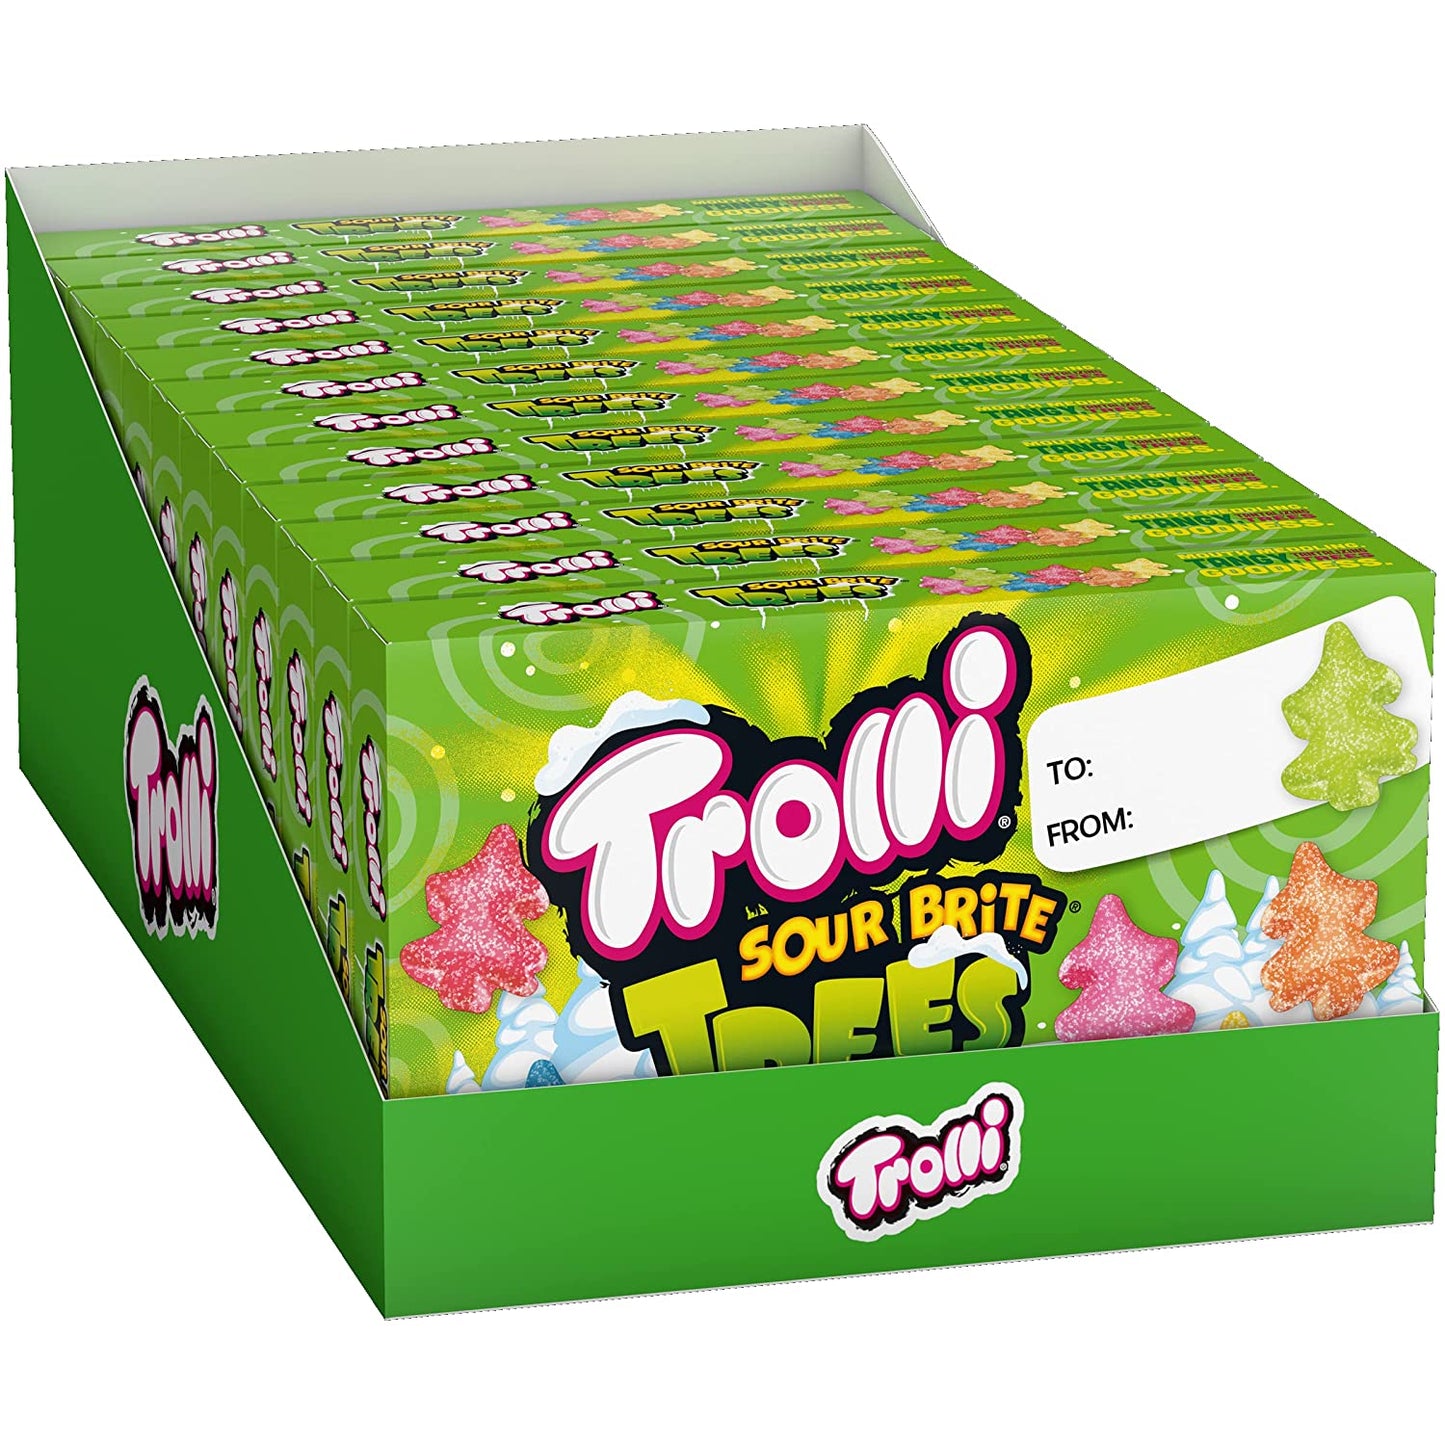 Trolli Sour Brite Trees, Holiday Sour Gummi Candy, Holiday Candy Theater Box, Christmas Candy Stocking Stuffers for Kids, 5.85 lbs, Pack of 12 Boxes